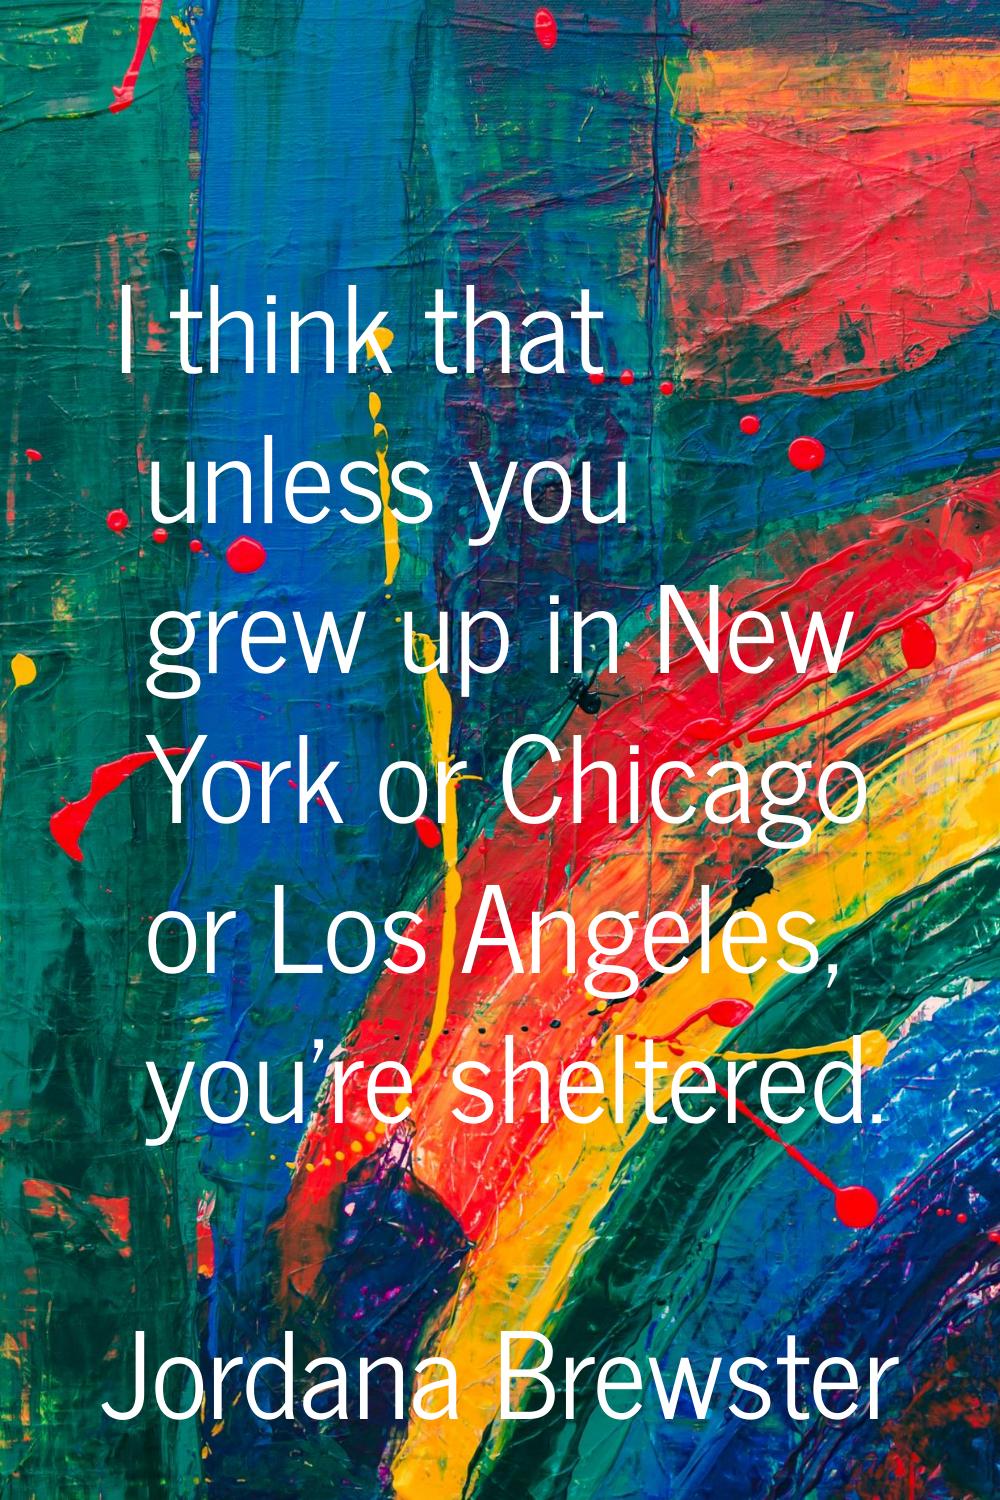 I think that unless you grew up in New York or Chicago or Los Angeles, you're sheltered.